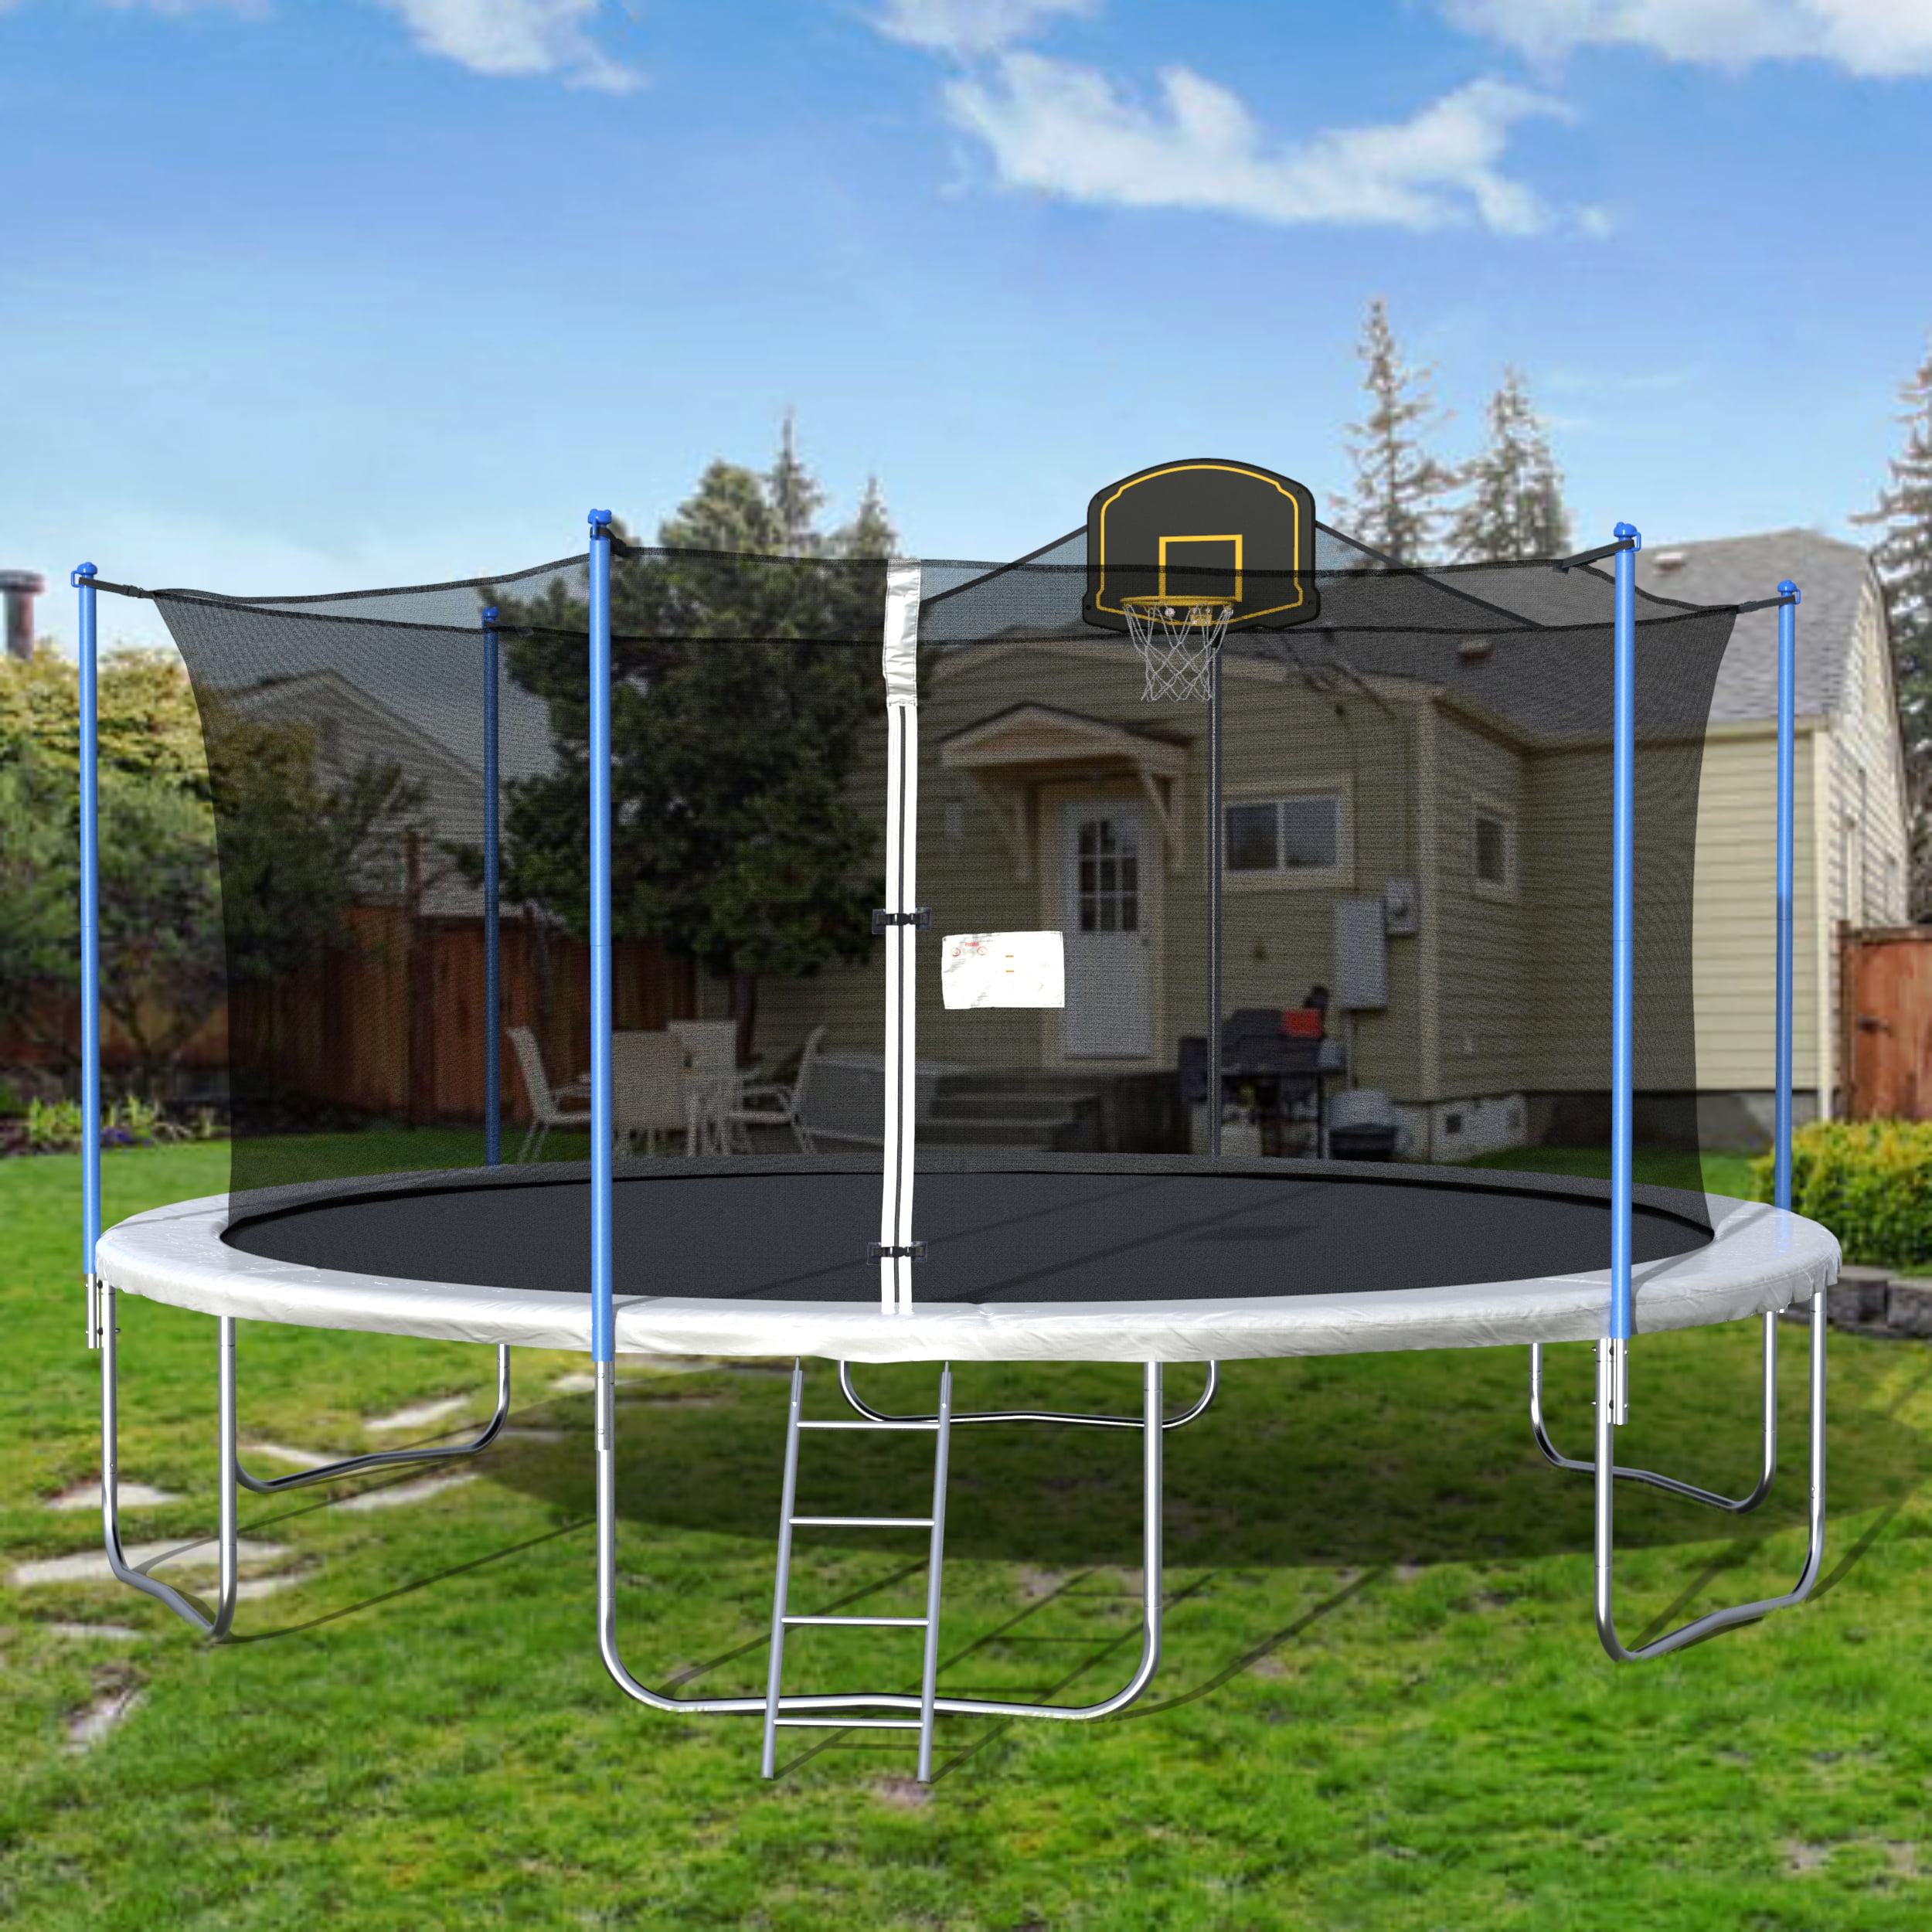 Tatub Trampoline 16FT 15FT 14FT 12FT Trampoline with Enclosure Net and Ladder Outdoor Recreational Trampoline for Kids Adults Jump 